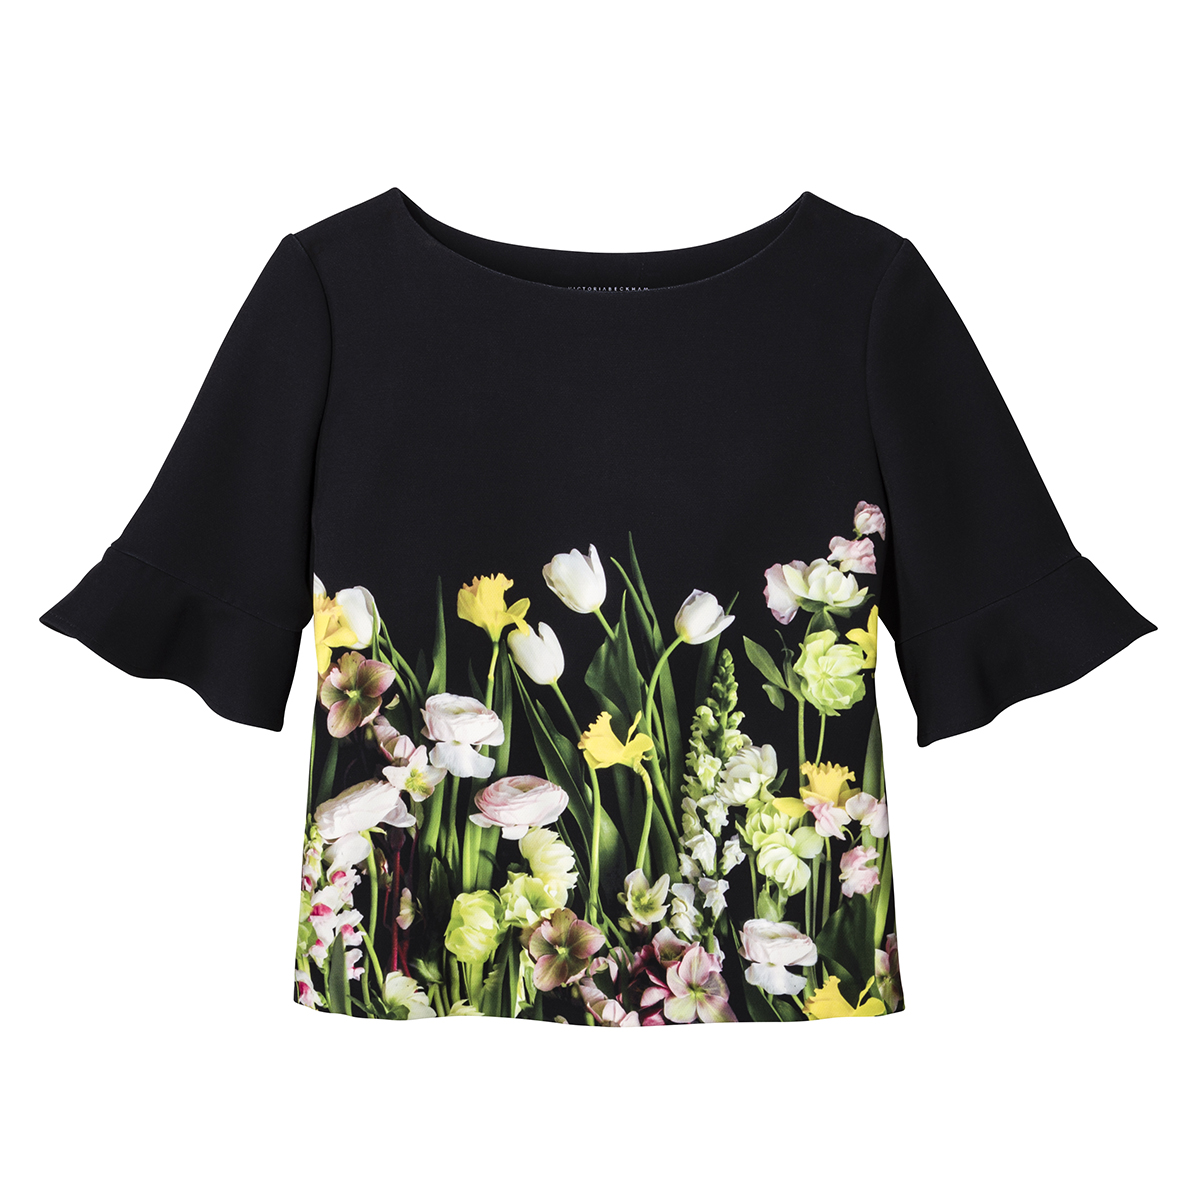 Photo Floral Top, $28